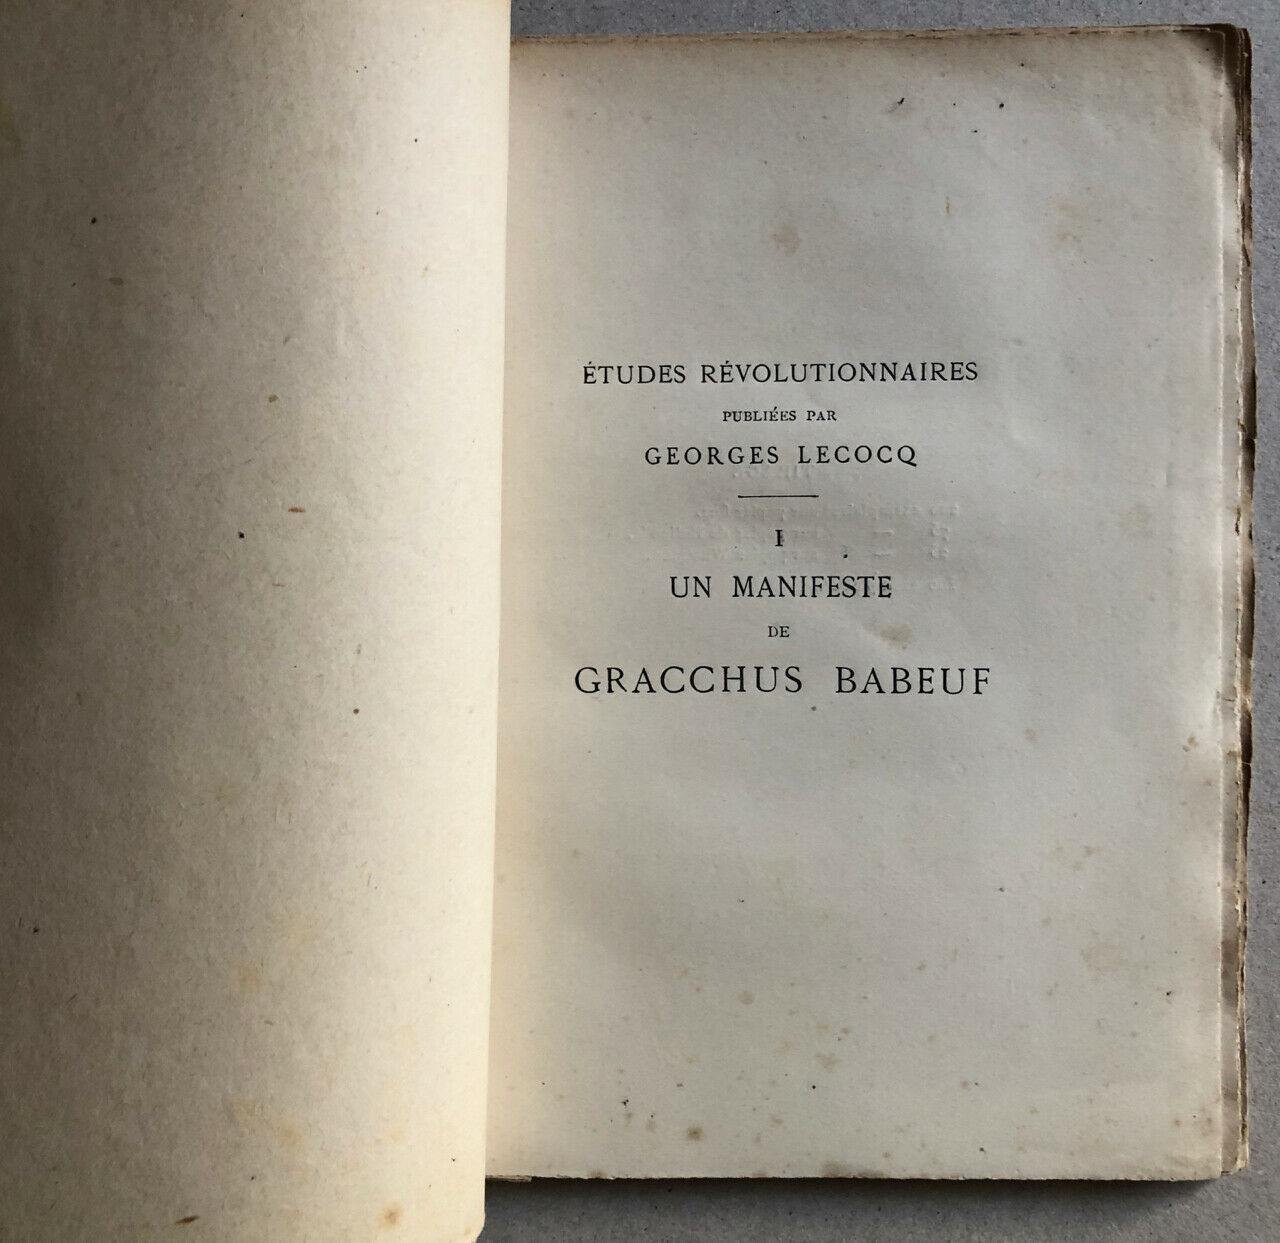 A Manifesto of Gracchus Babeuf published by Georges Lecocq — Bibliophiles — 1885